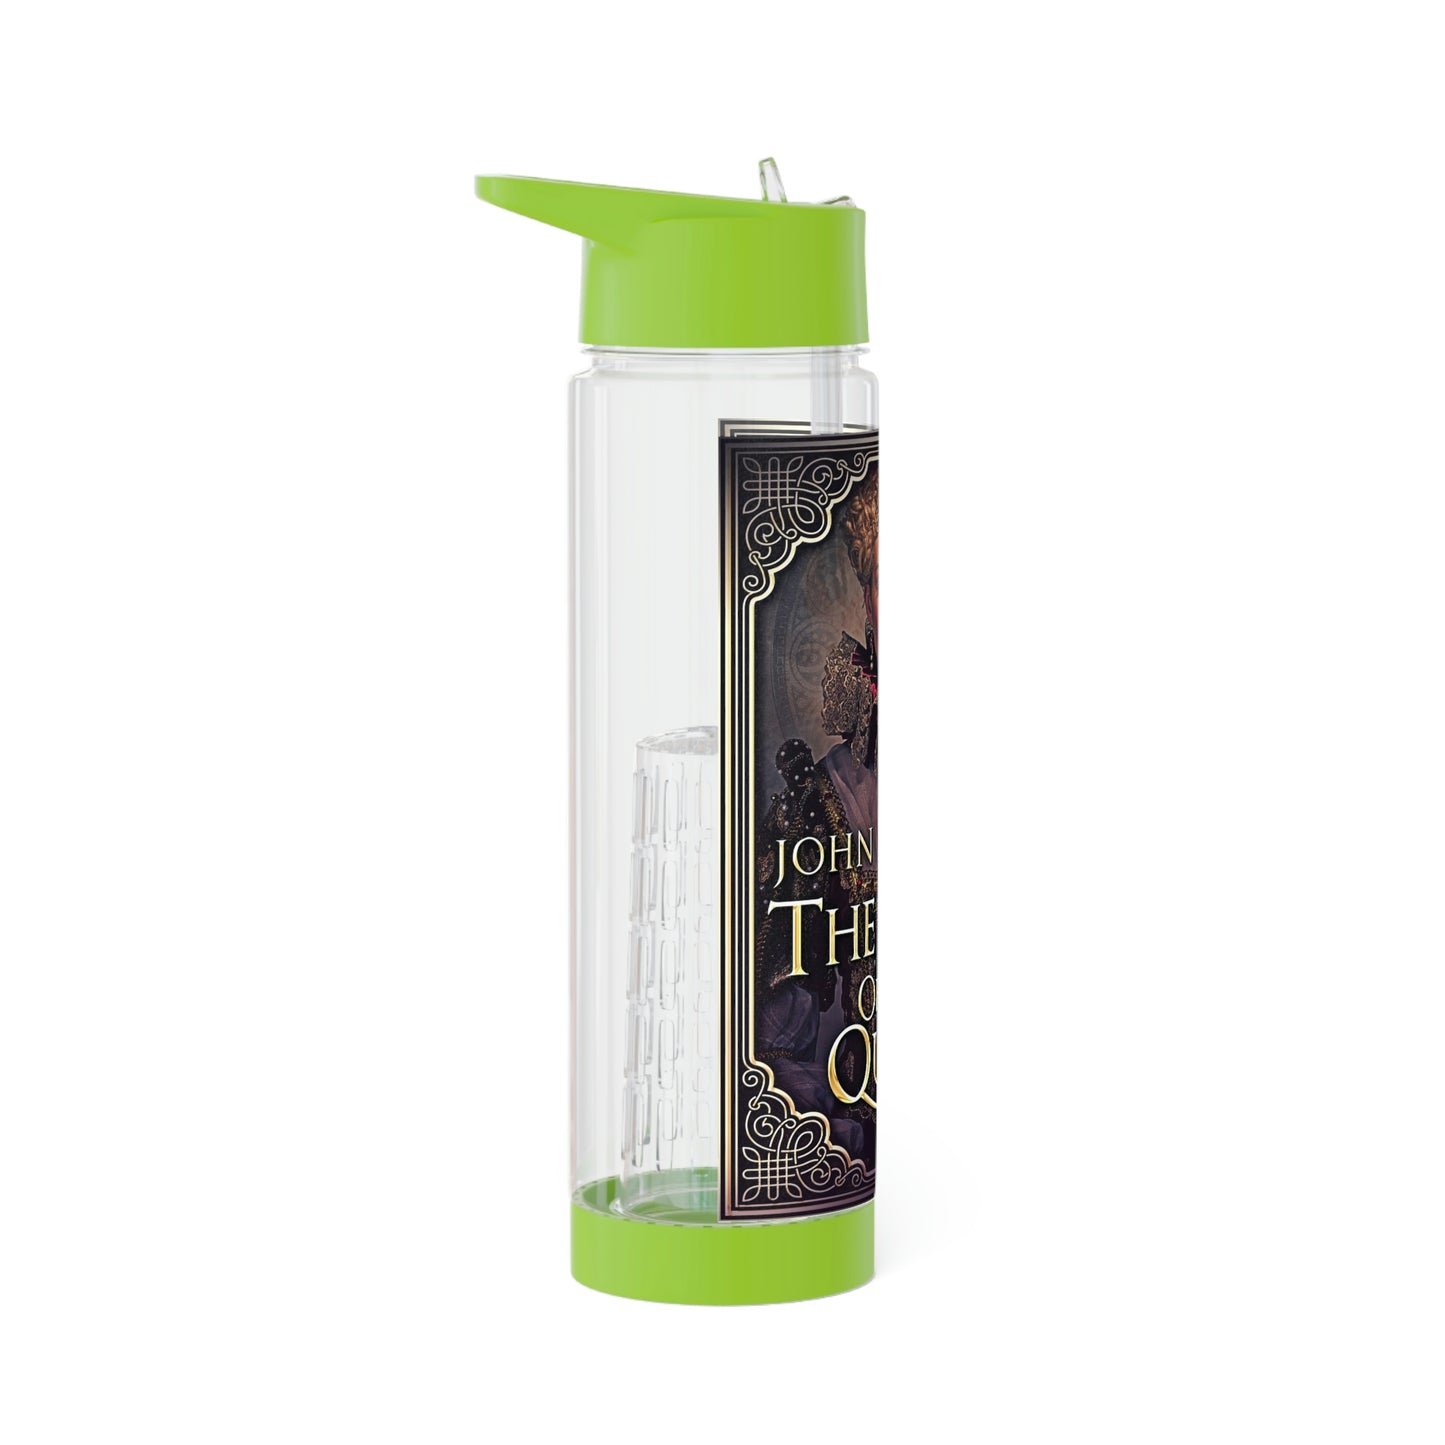 The Guise of the Queen - Infuser Water Bottle